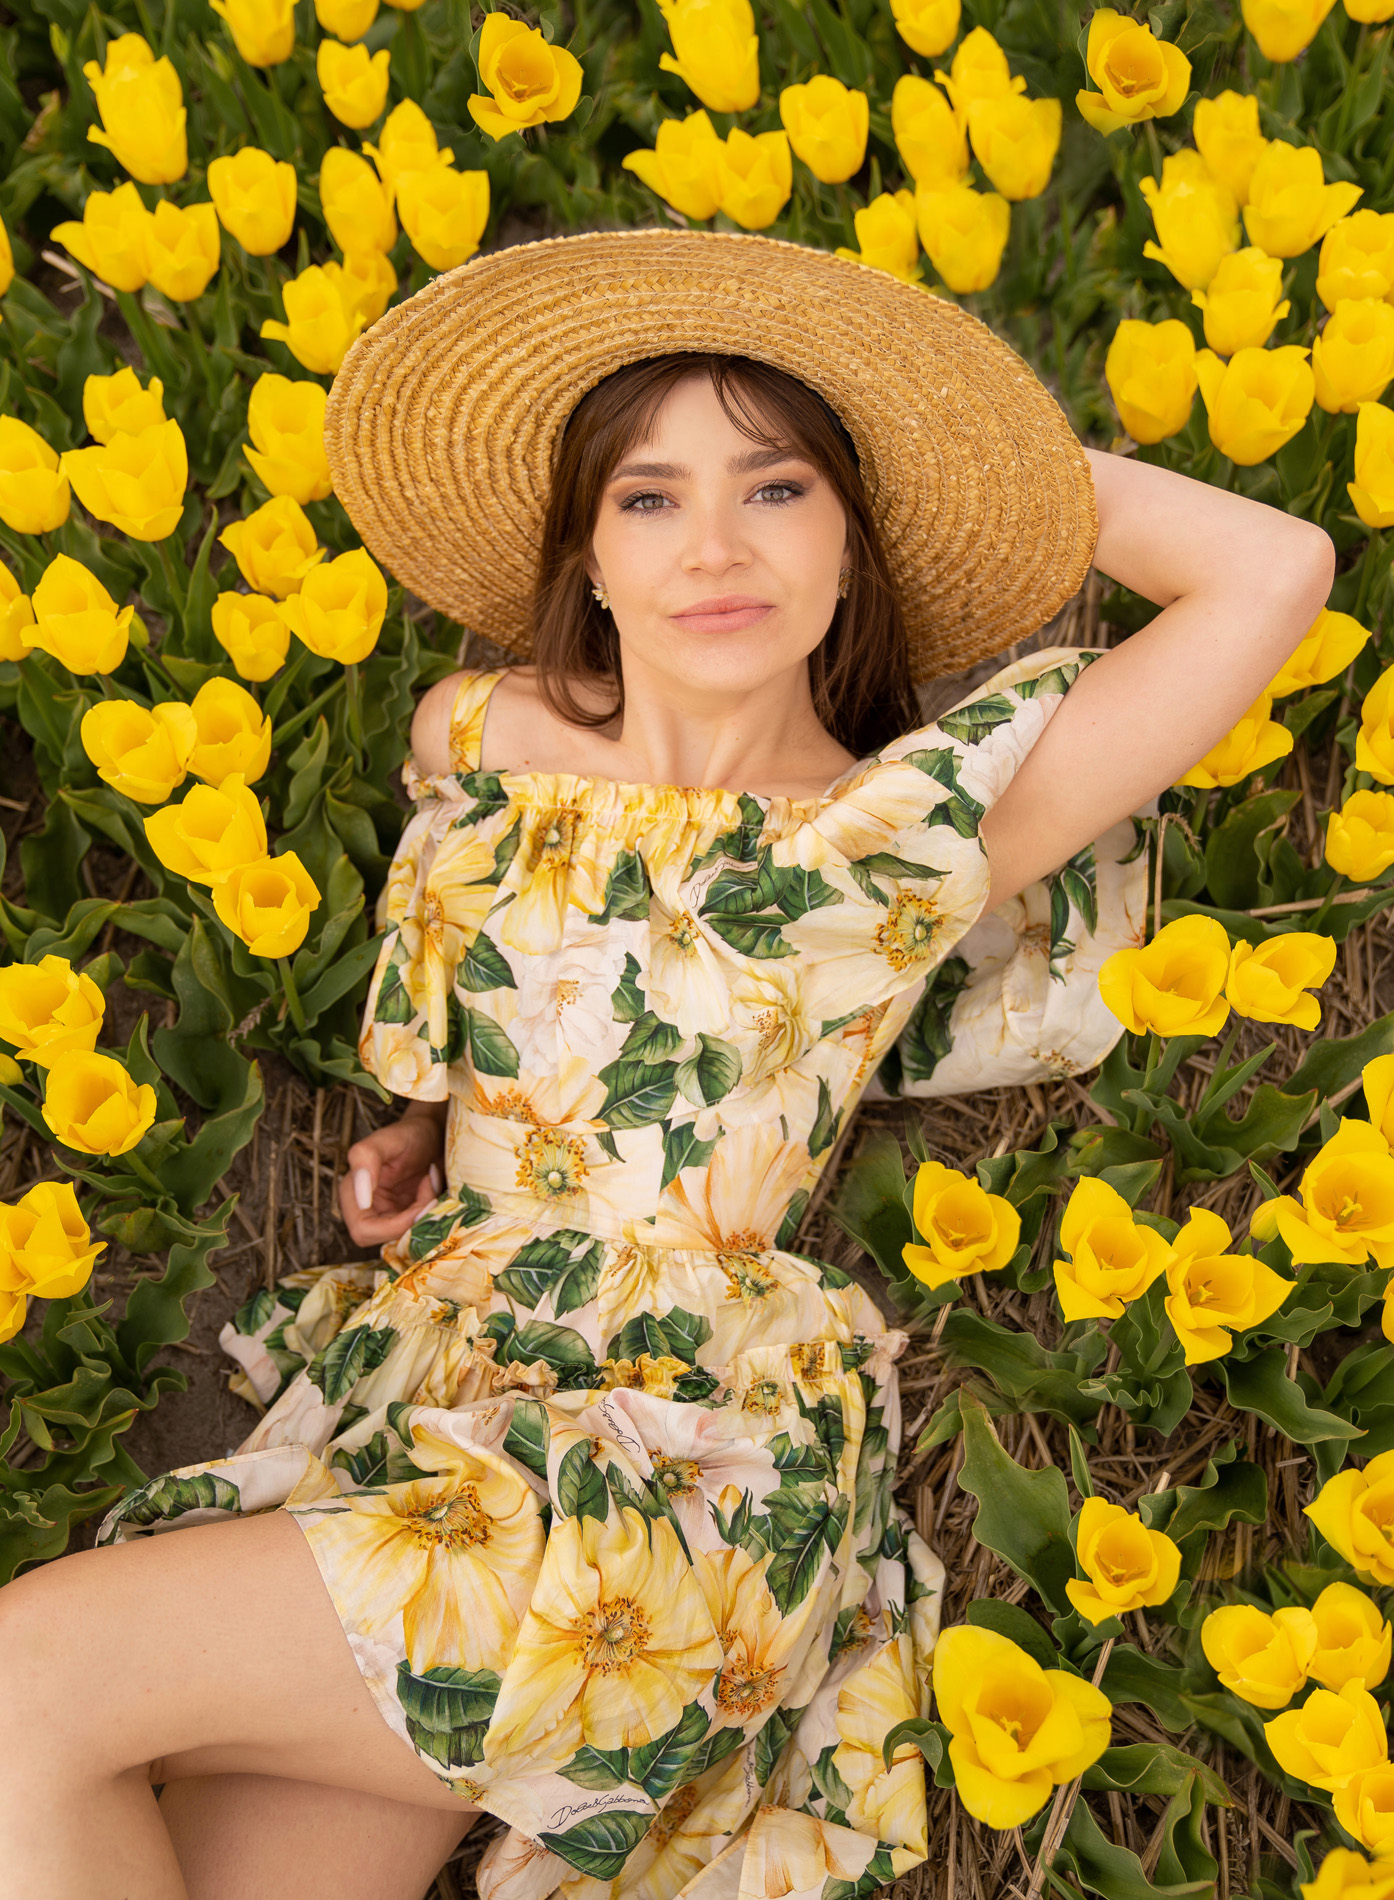 During her tulip photoshoot, a woman lies on the ground surrounded by yellow tulip fields.